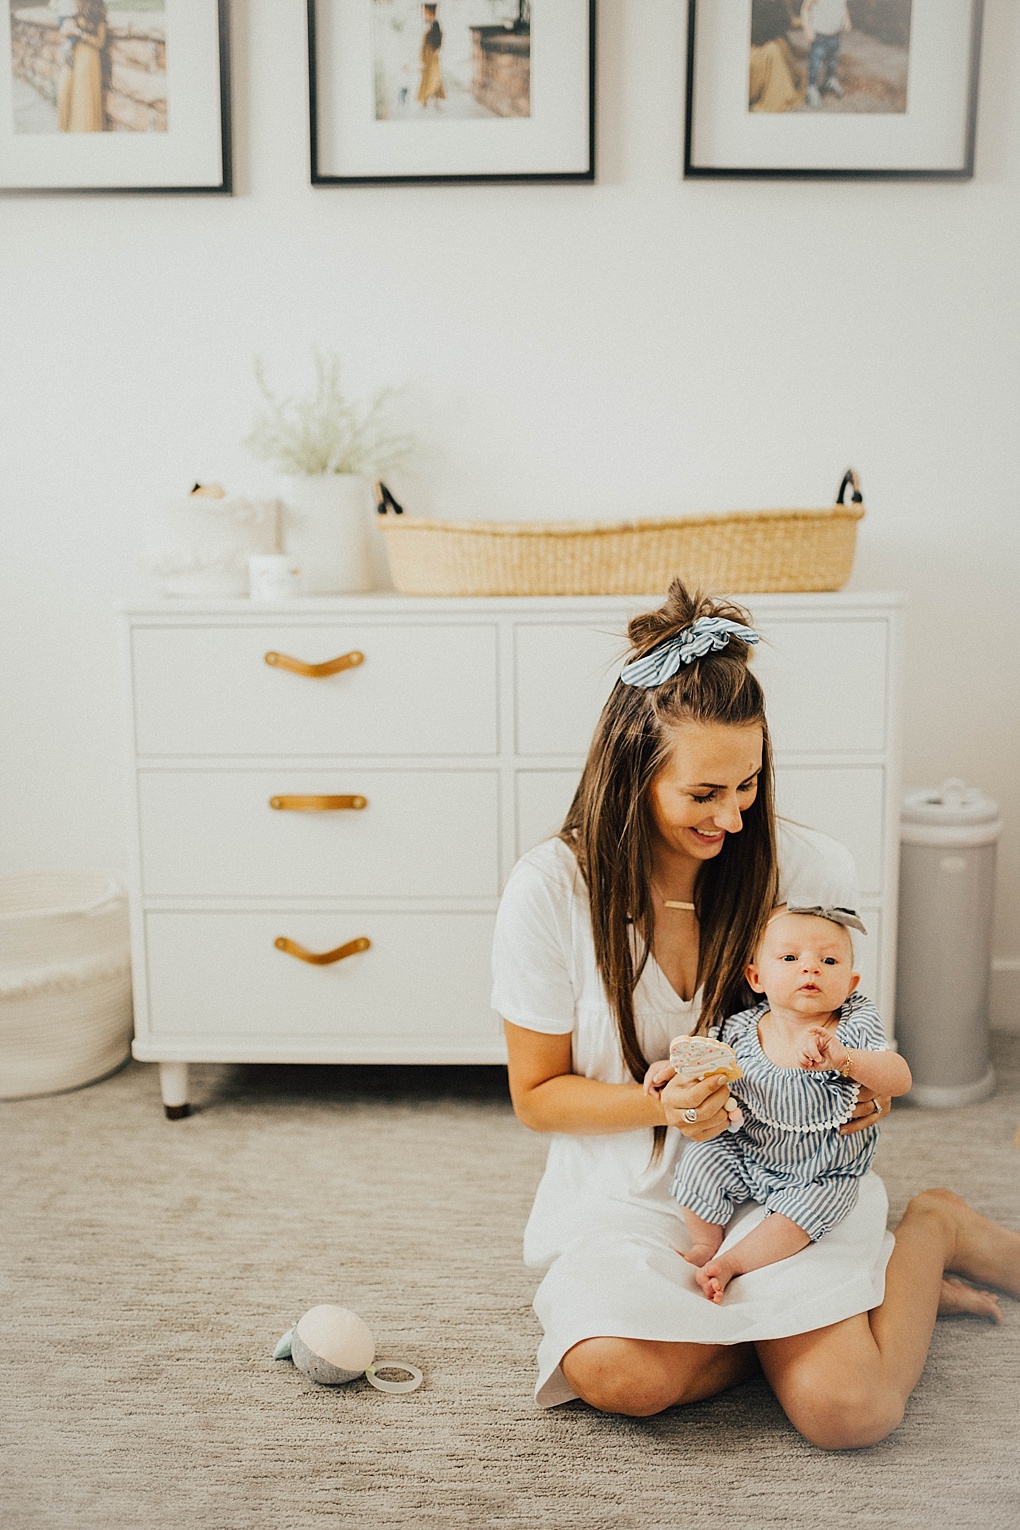 Diaper changes can be a bit frustrating, especially with a newborn! Utah Style blogger Dani Marie is sharing her top tips on making diaper changes easier!